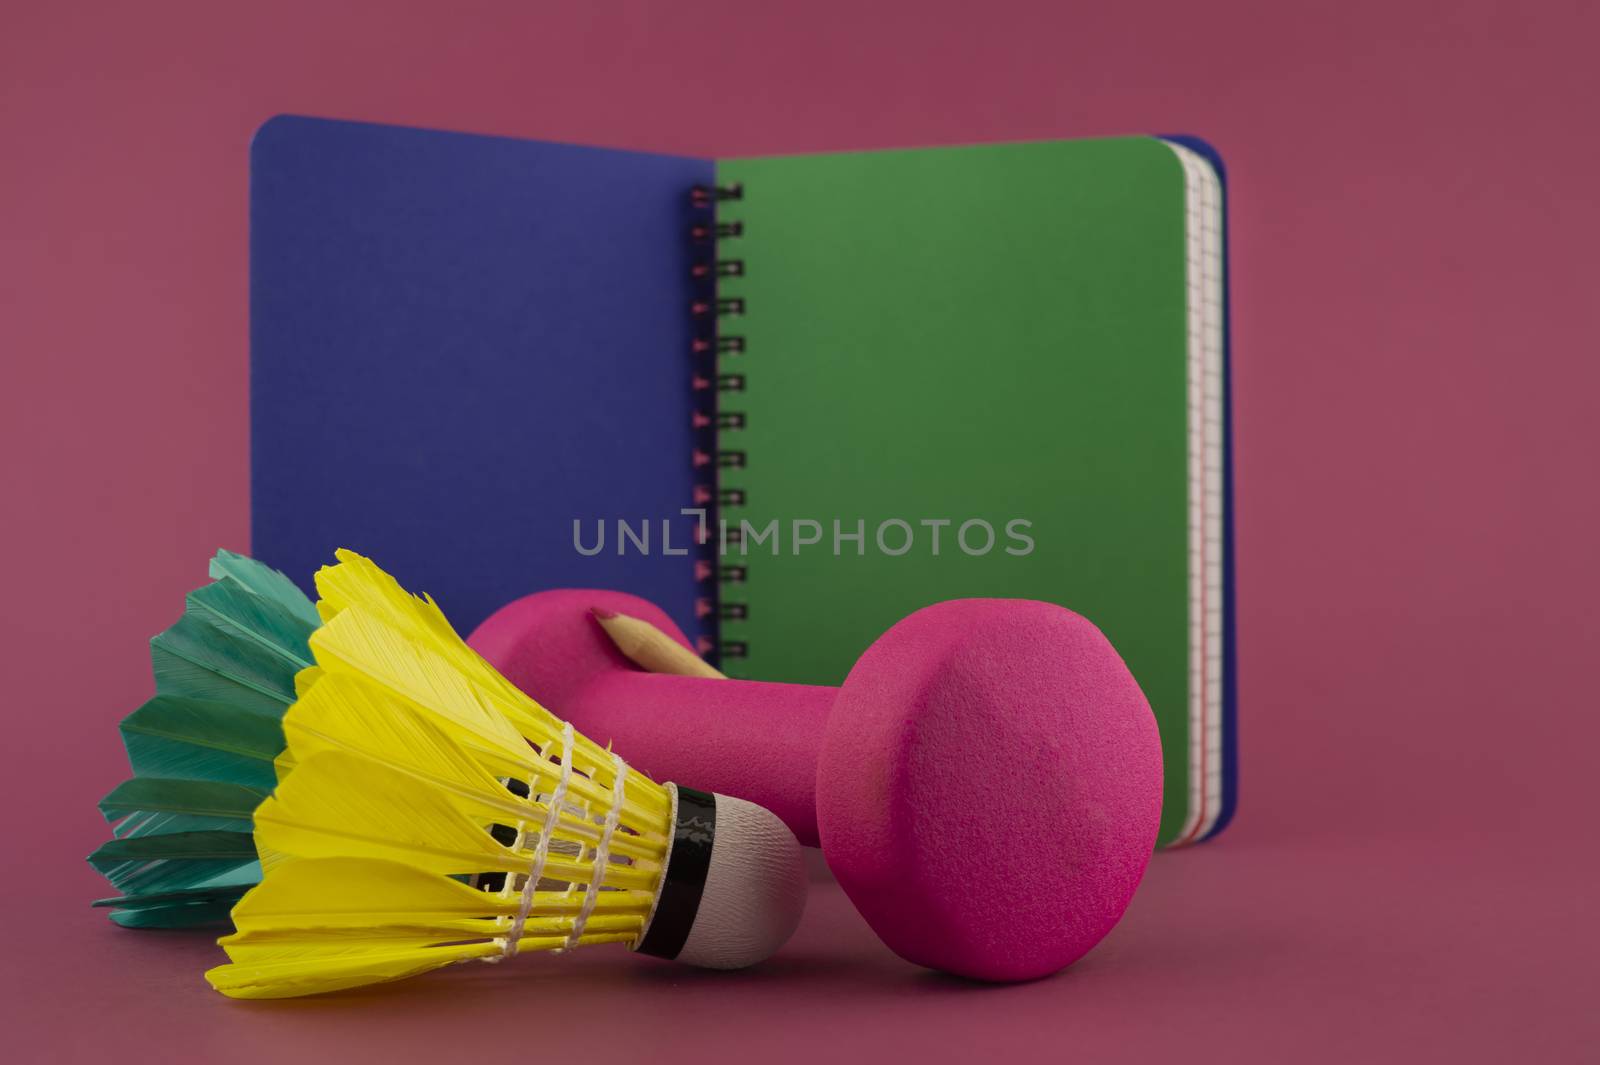 Sport weight loss and fitness concept with a badminton shuttlecocks and dumbbell weight alongside an open notebook with pen on a bright pink background